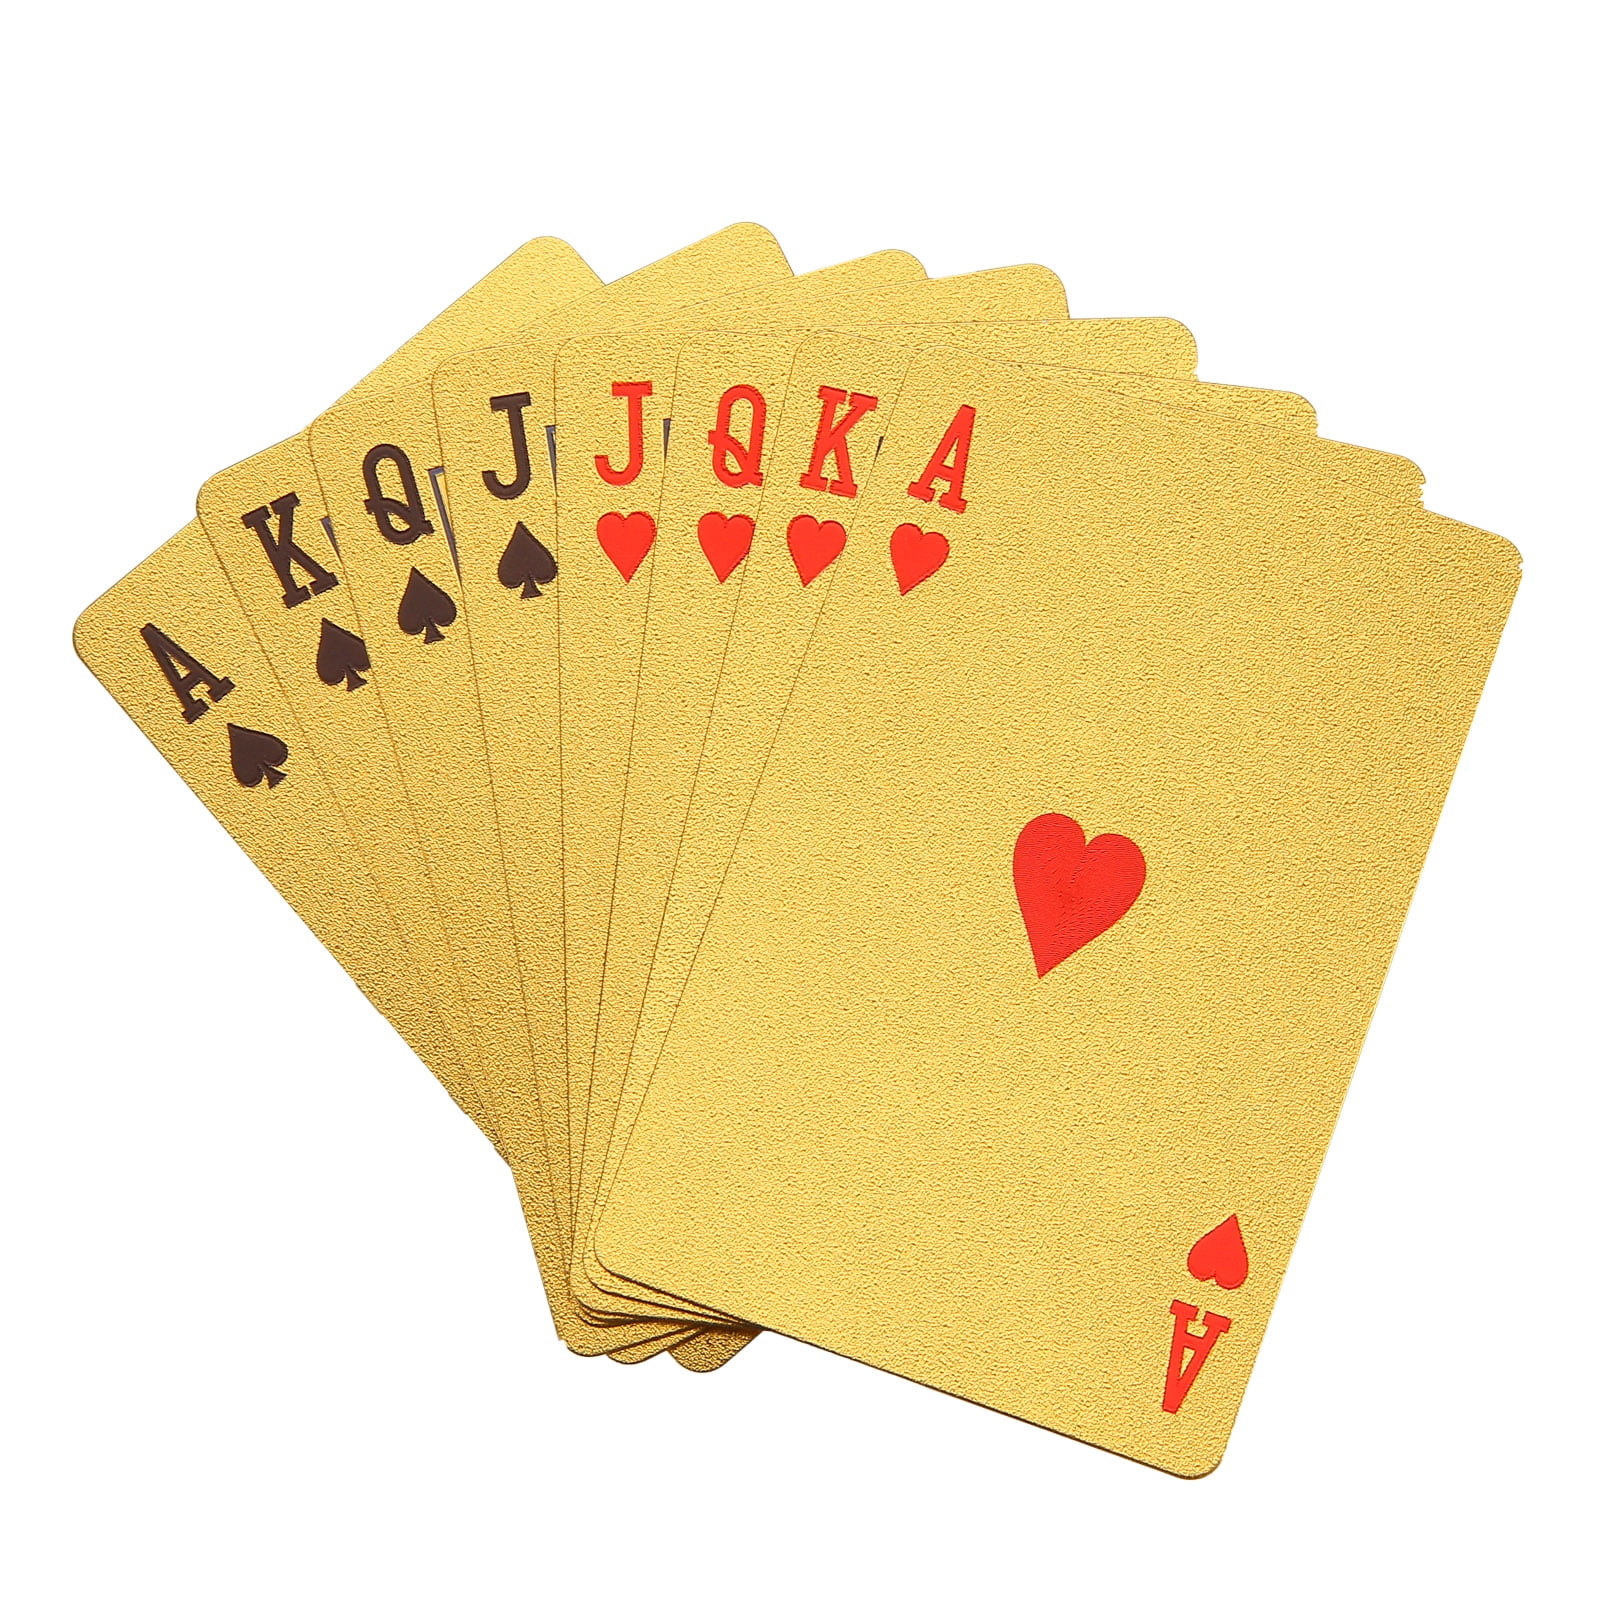 Details about   Plastic $100 Design Gold Playing Cards A deck of Cards Regular Poker Size 